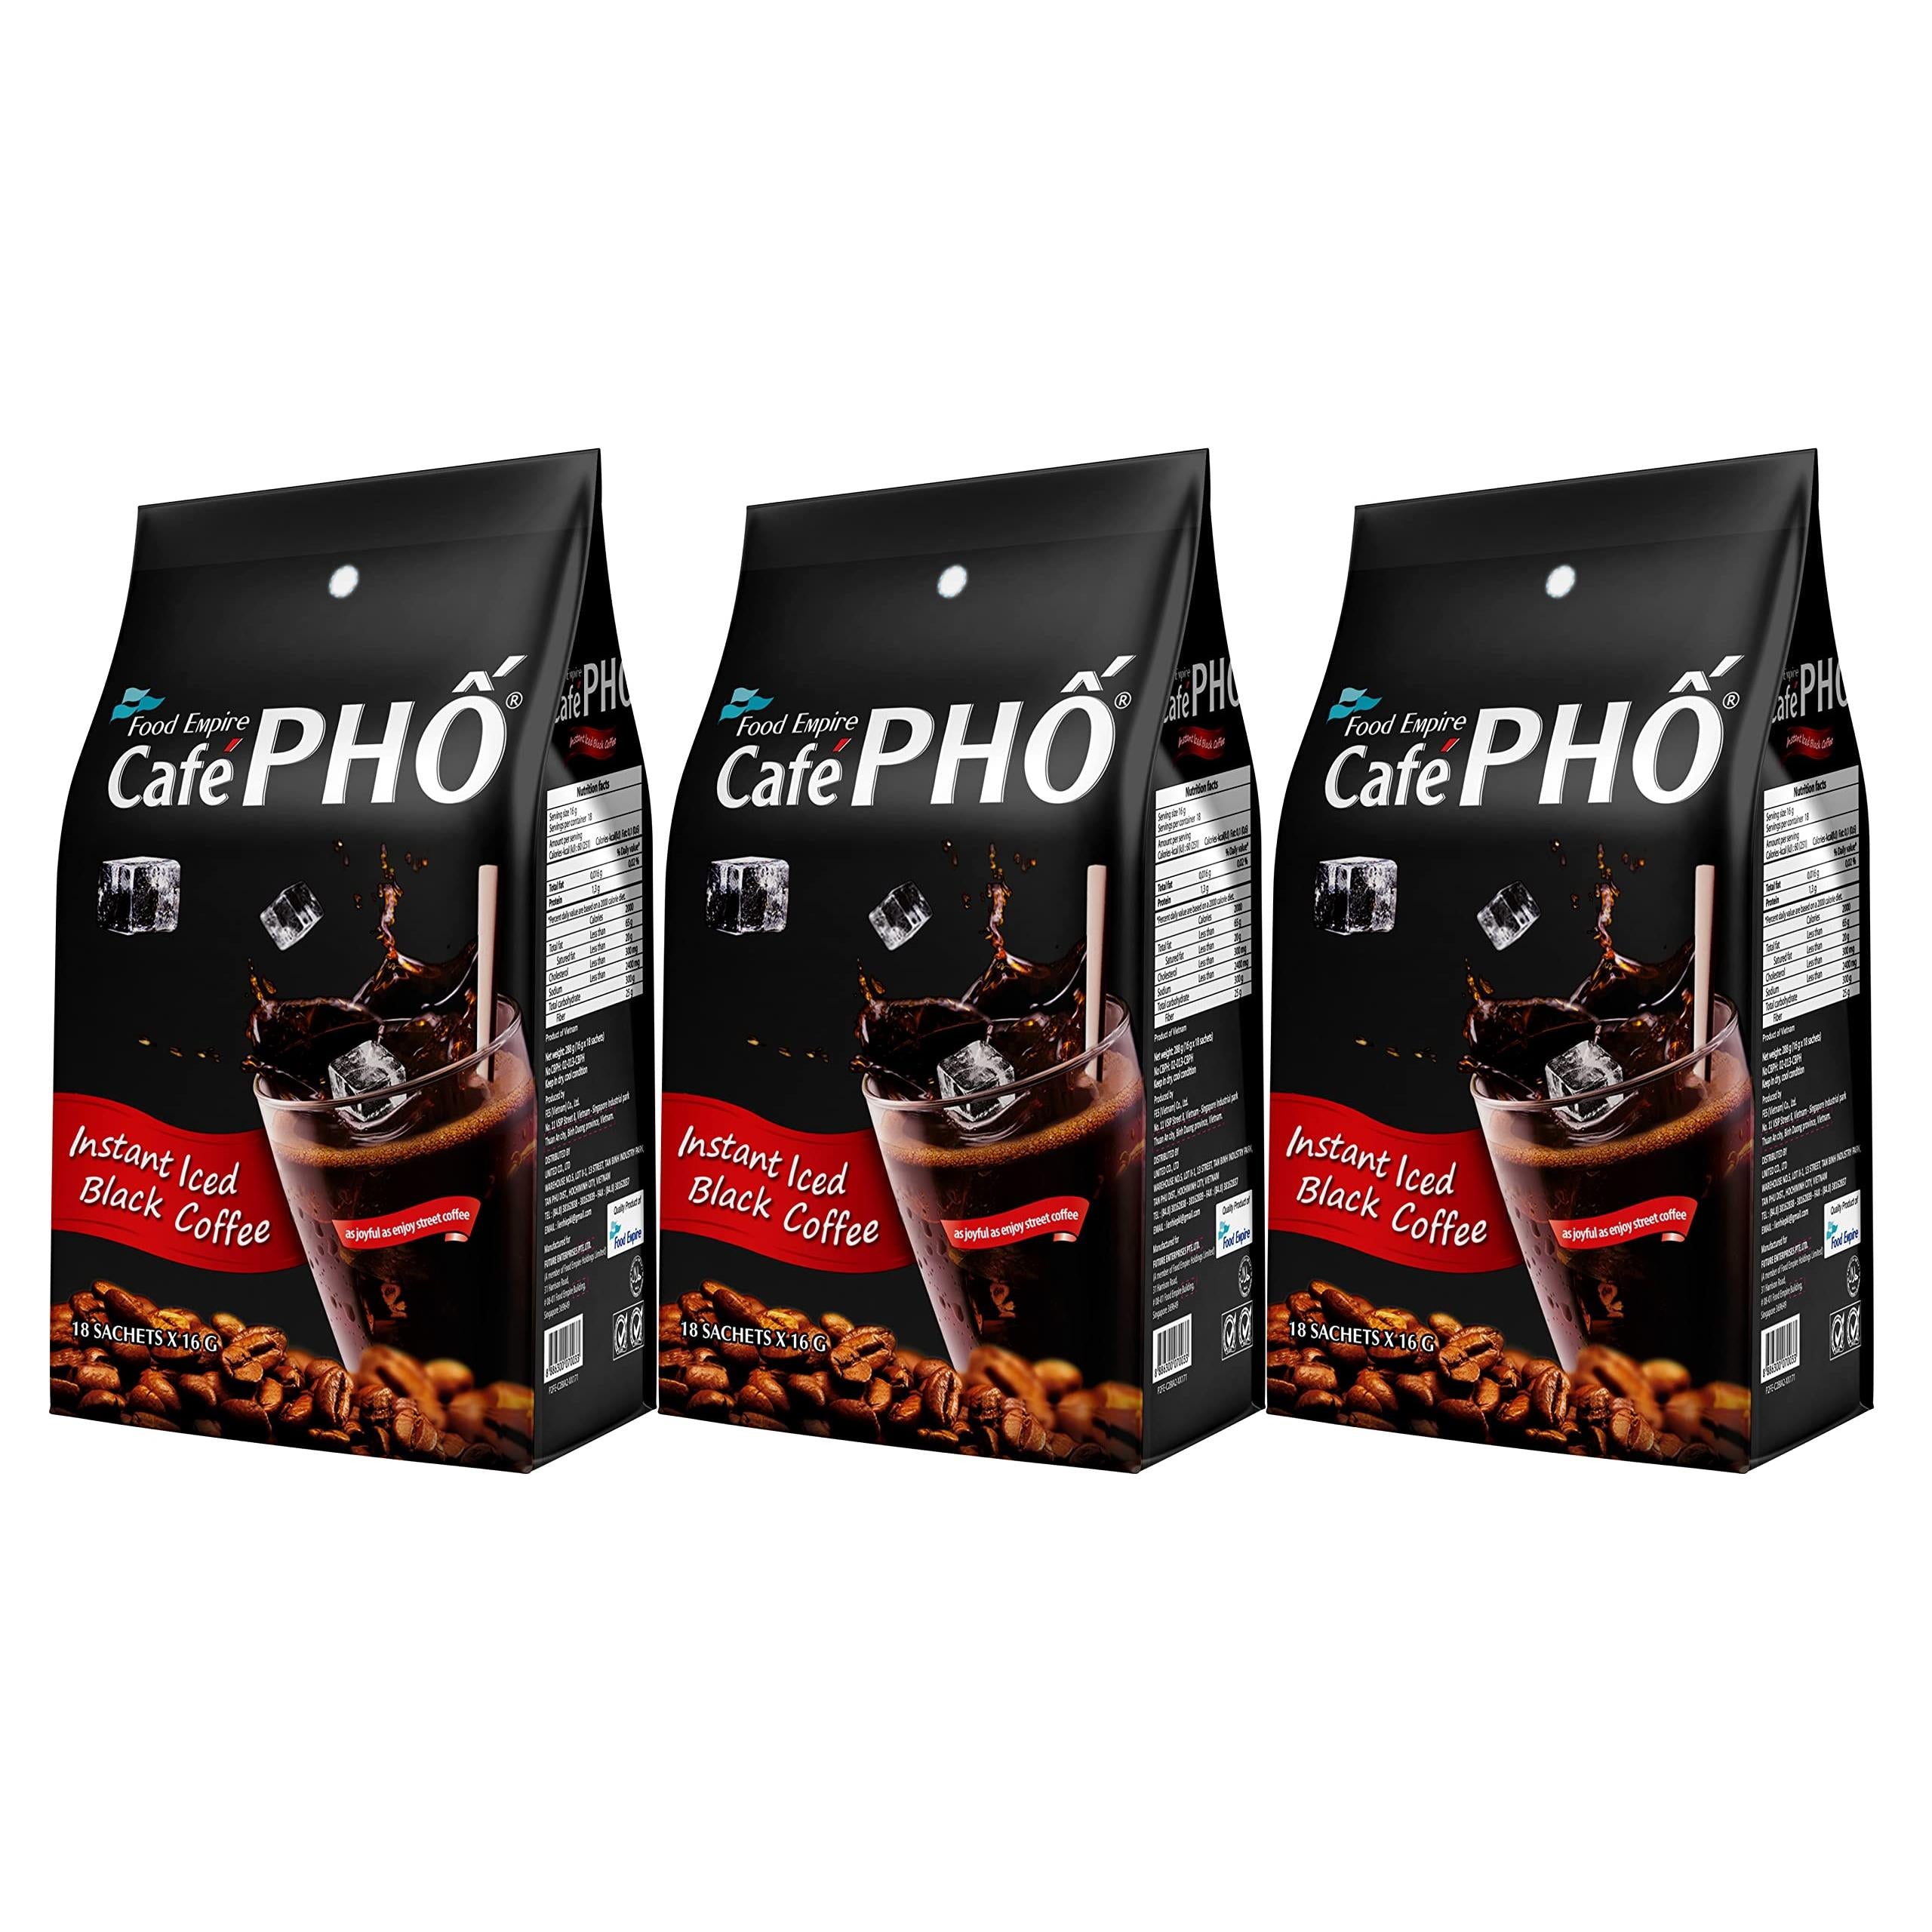 Cafe Pho Vietnamese Instant Coffee Mix, Iced Black Coffee, Cafe Den Da, Single Serve Coffee Packets, Bag of 18 Sachets, Pack of 3